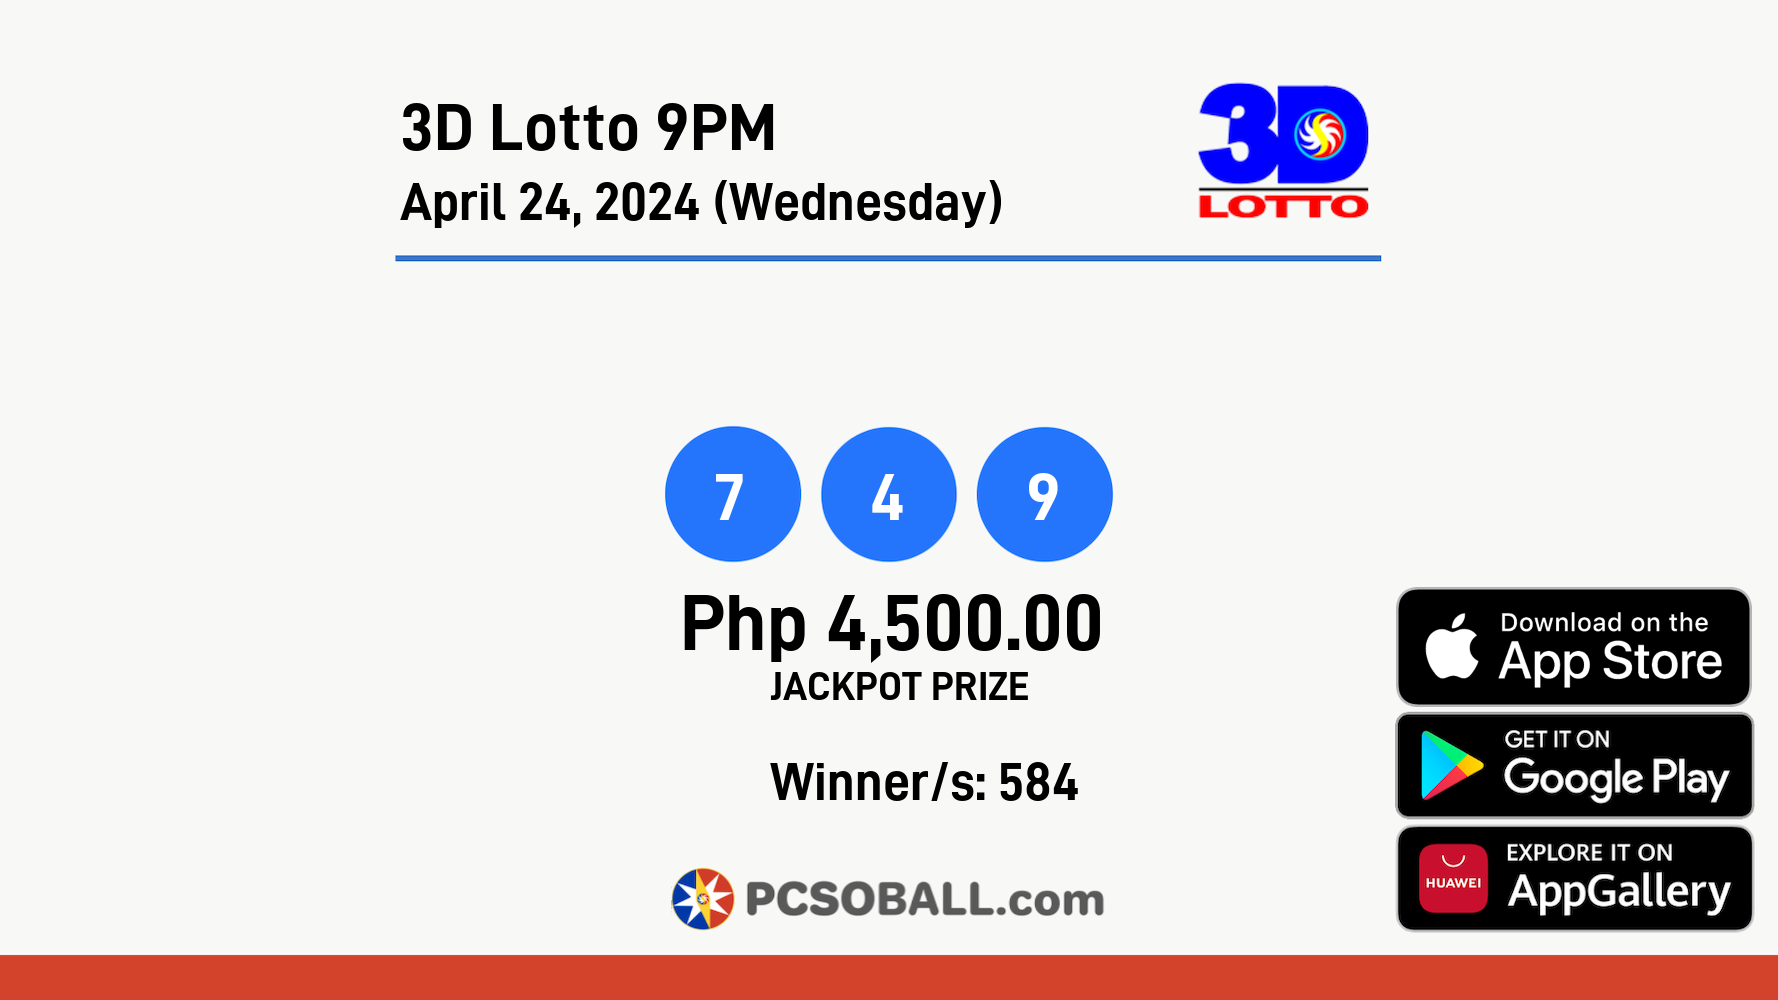 3D Lotto 9PM April 24, 2024 (Wednesday) Result